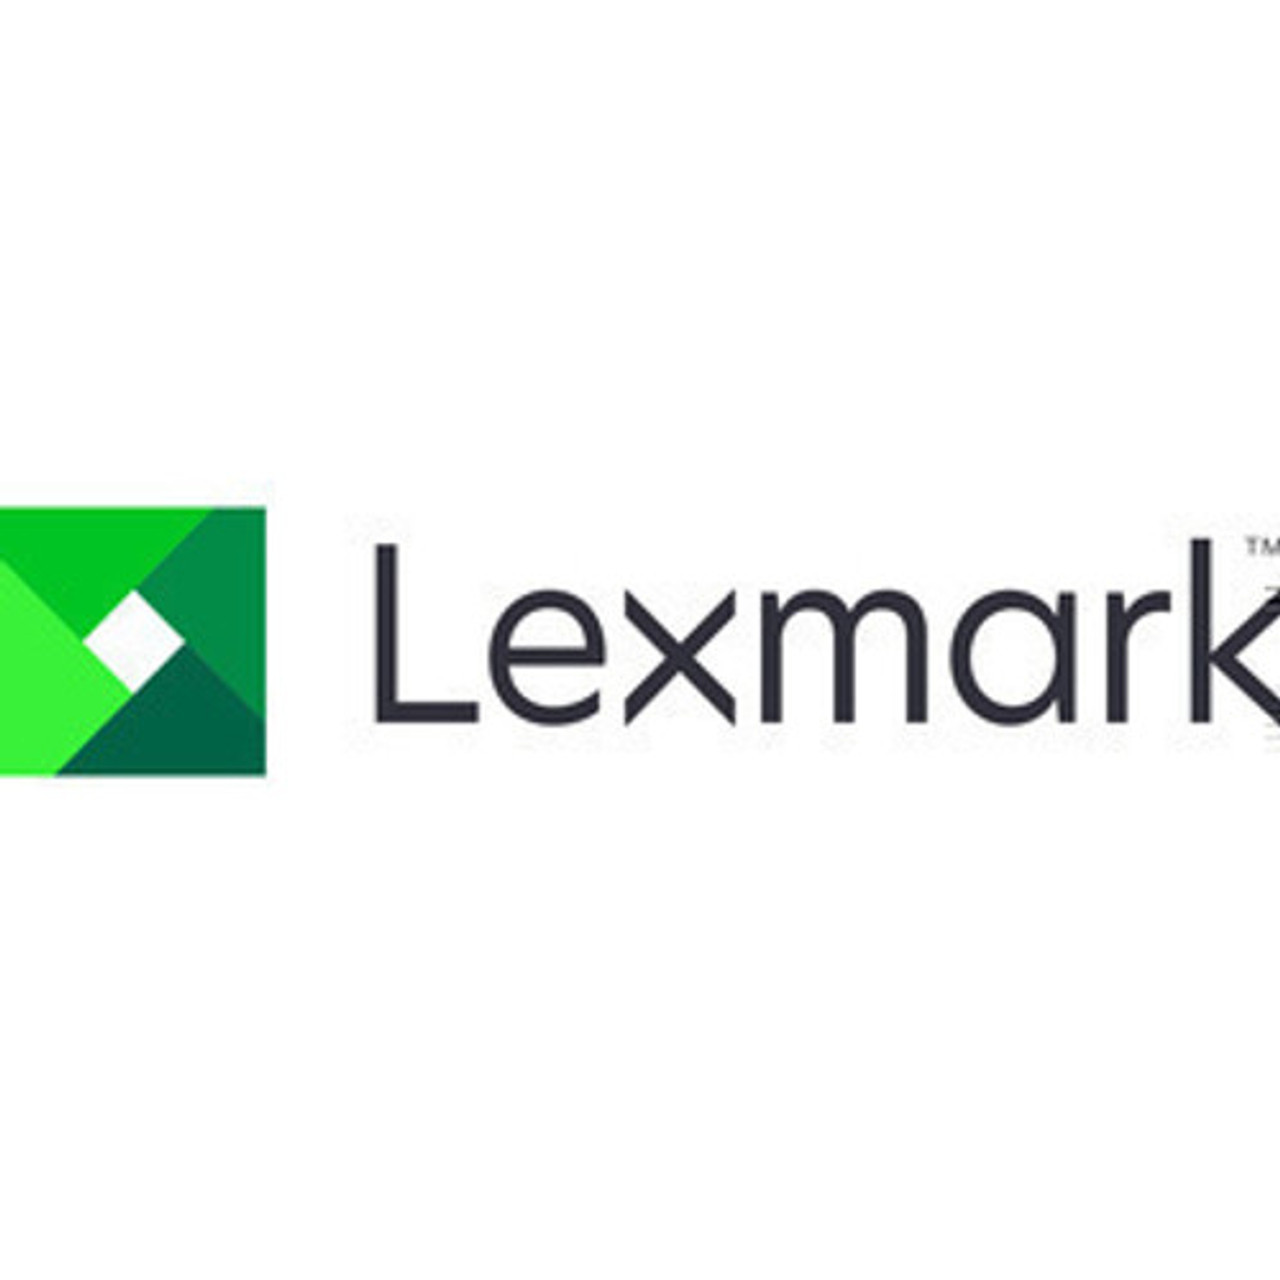 Lexmark Low Voltage Power Supply Card Assembly - 40X4355